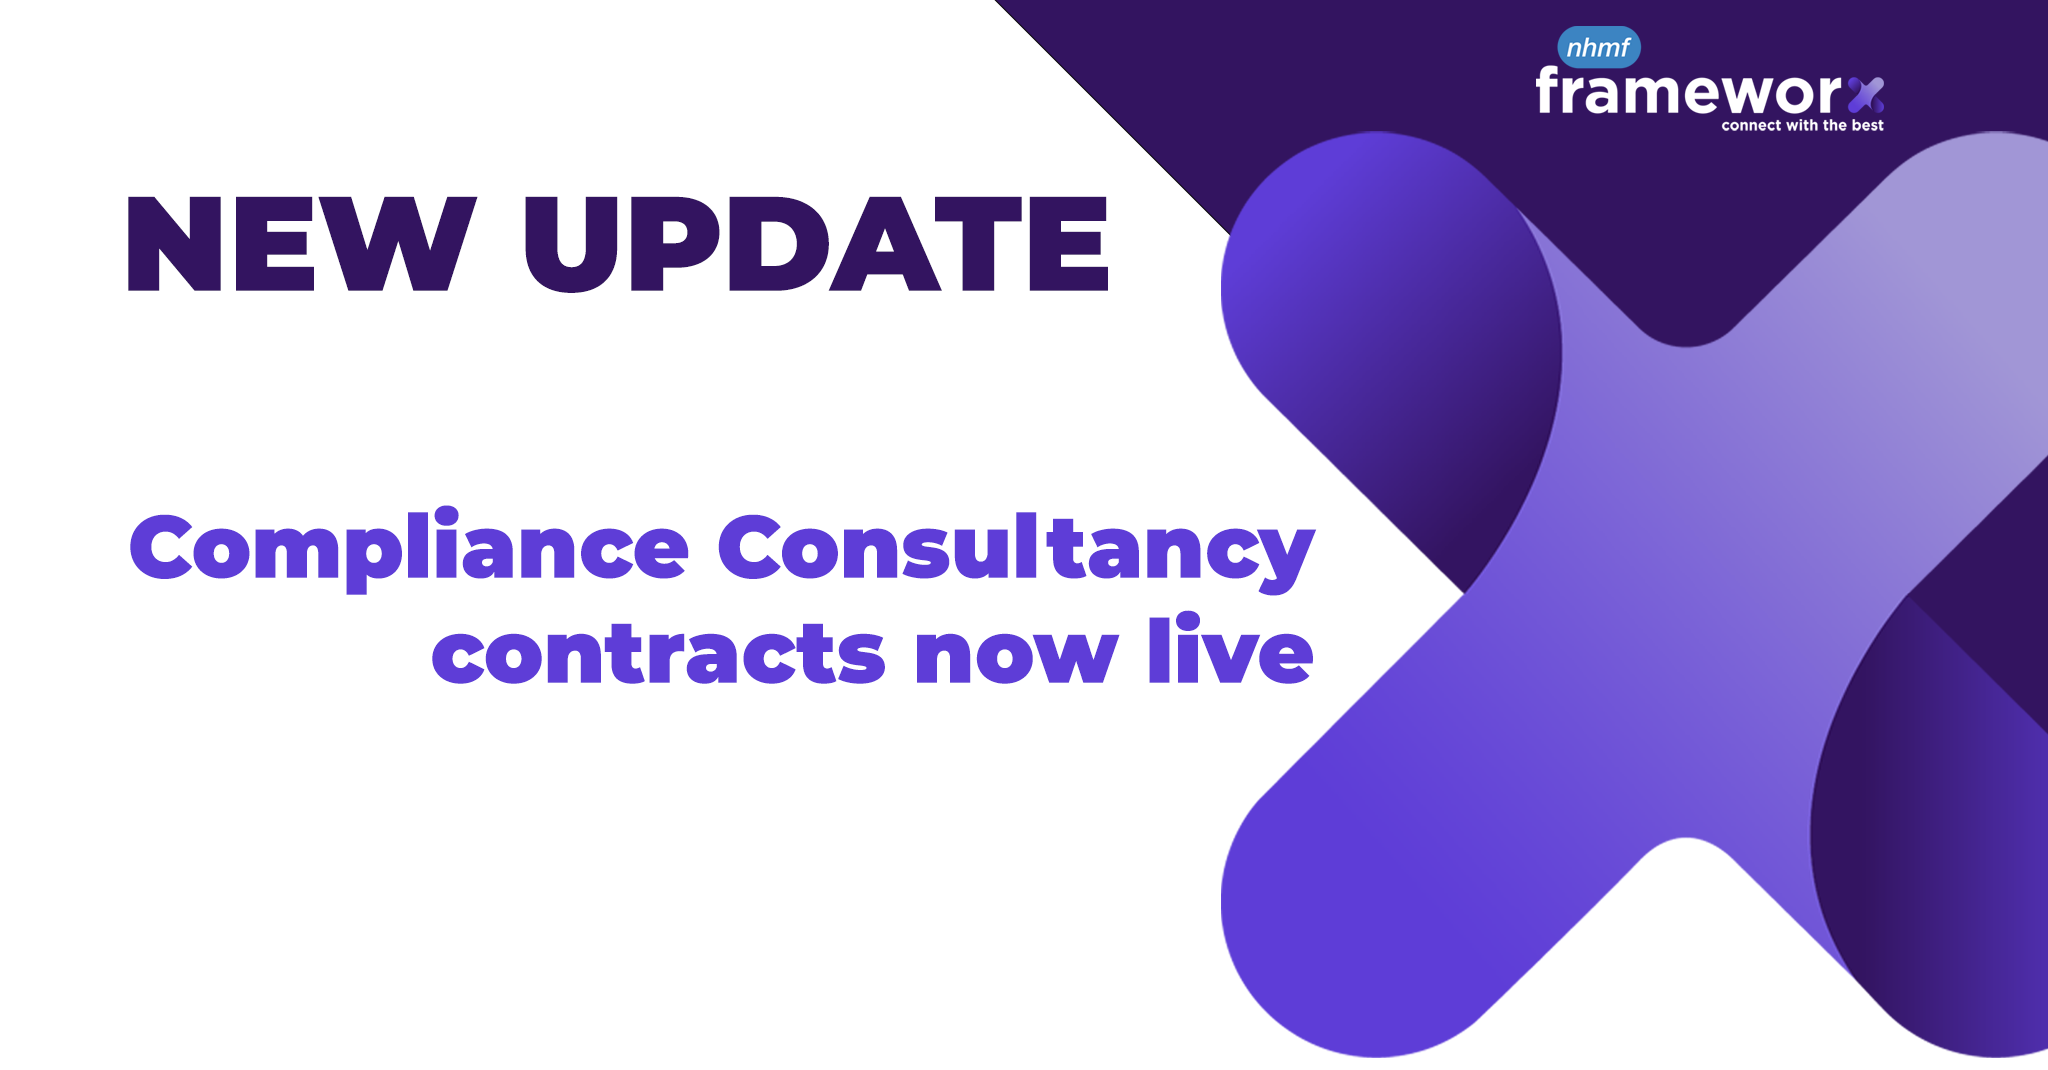 Compliance Consultancy Contracts now live